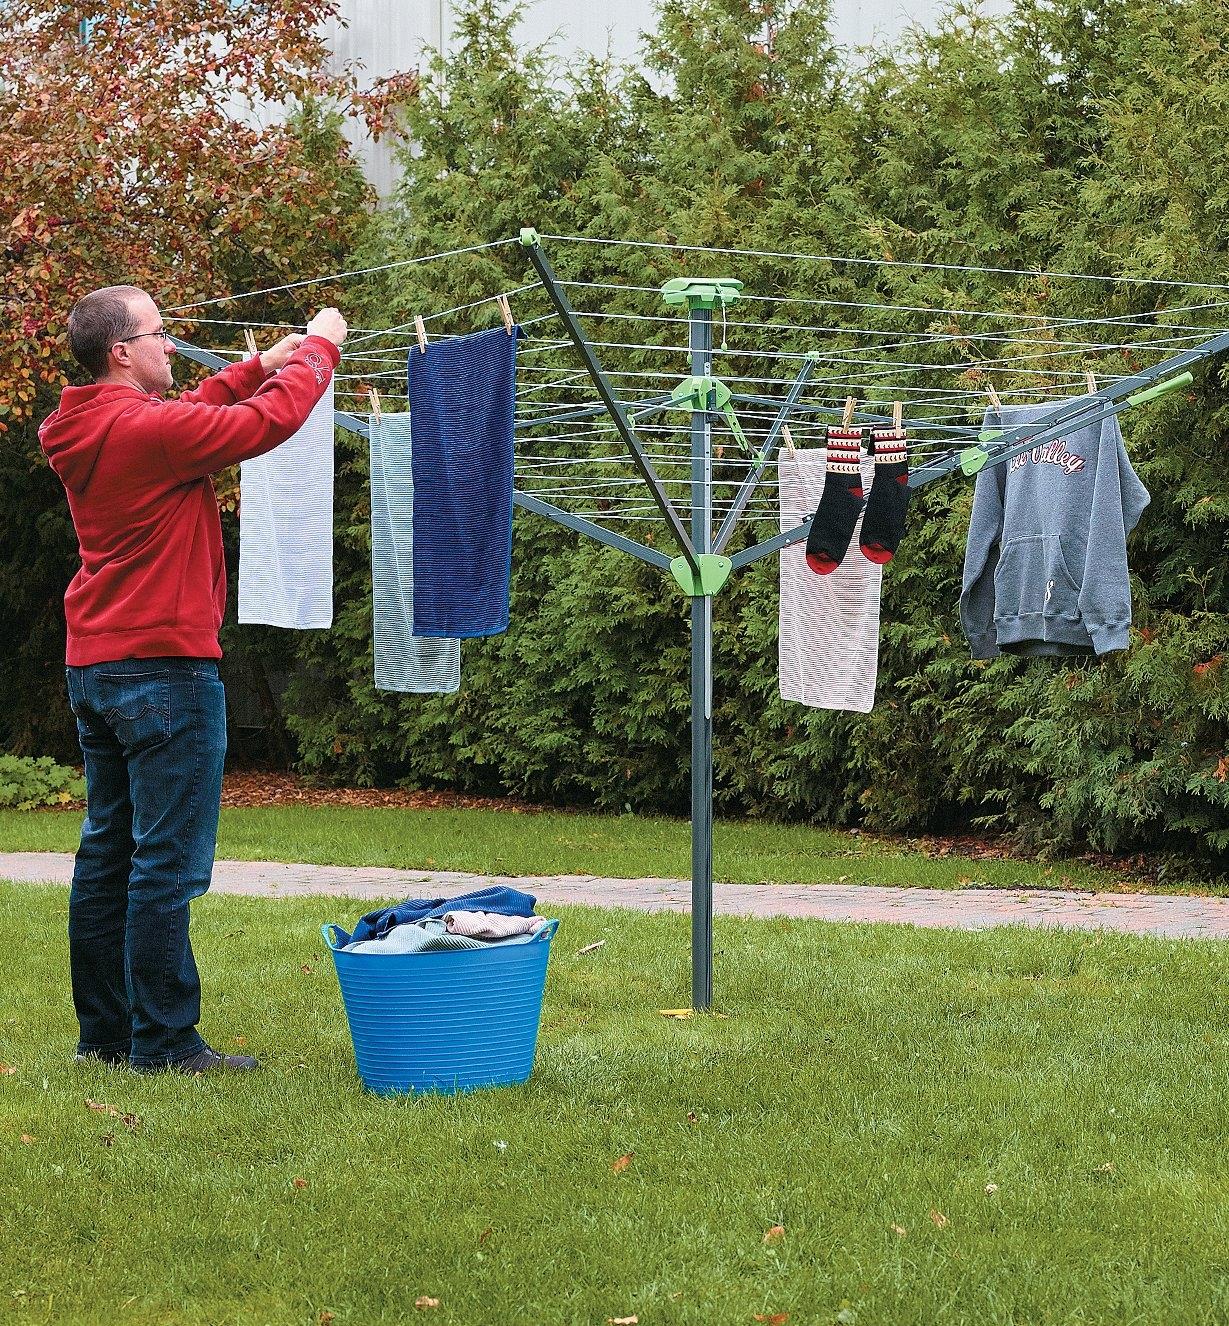 Folding Clothes Dryer with laundry hanging from the drying lines